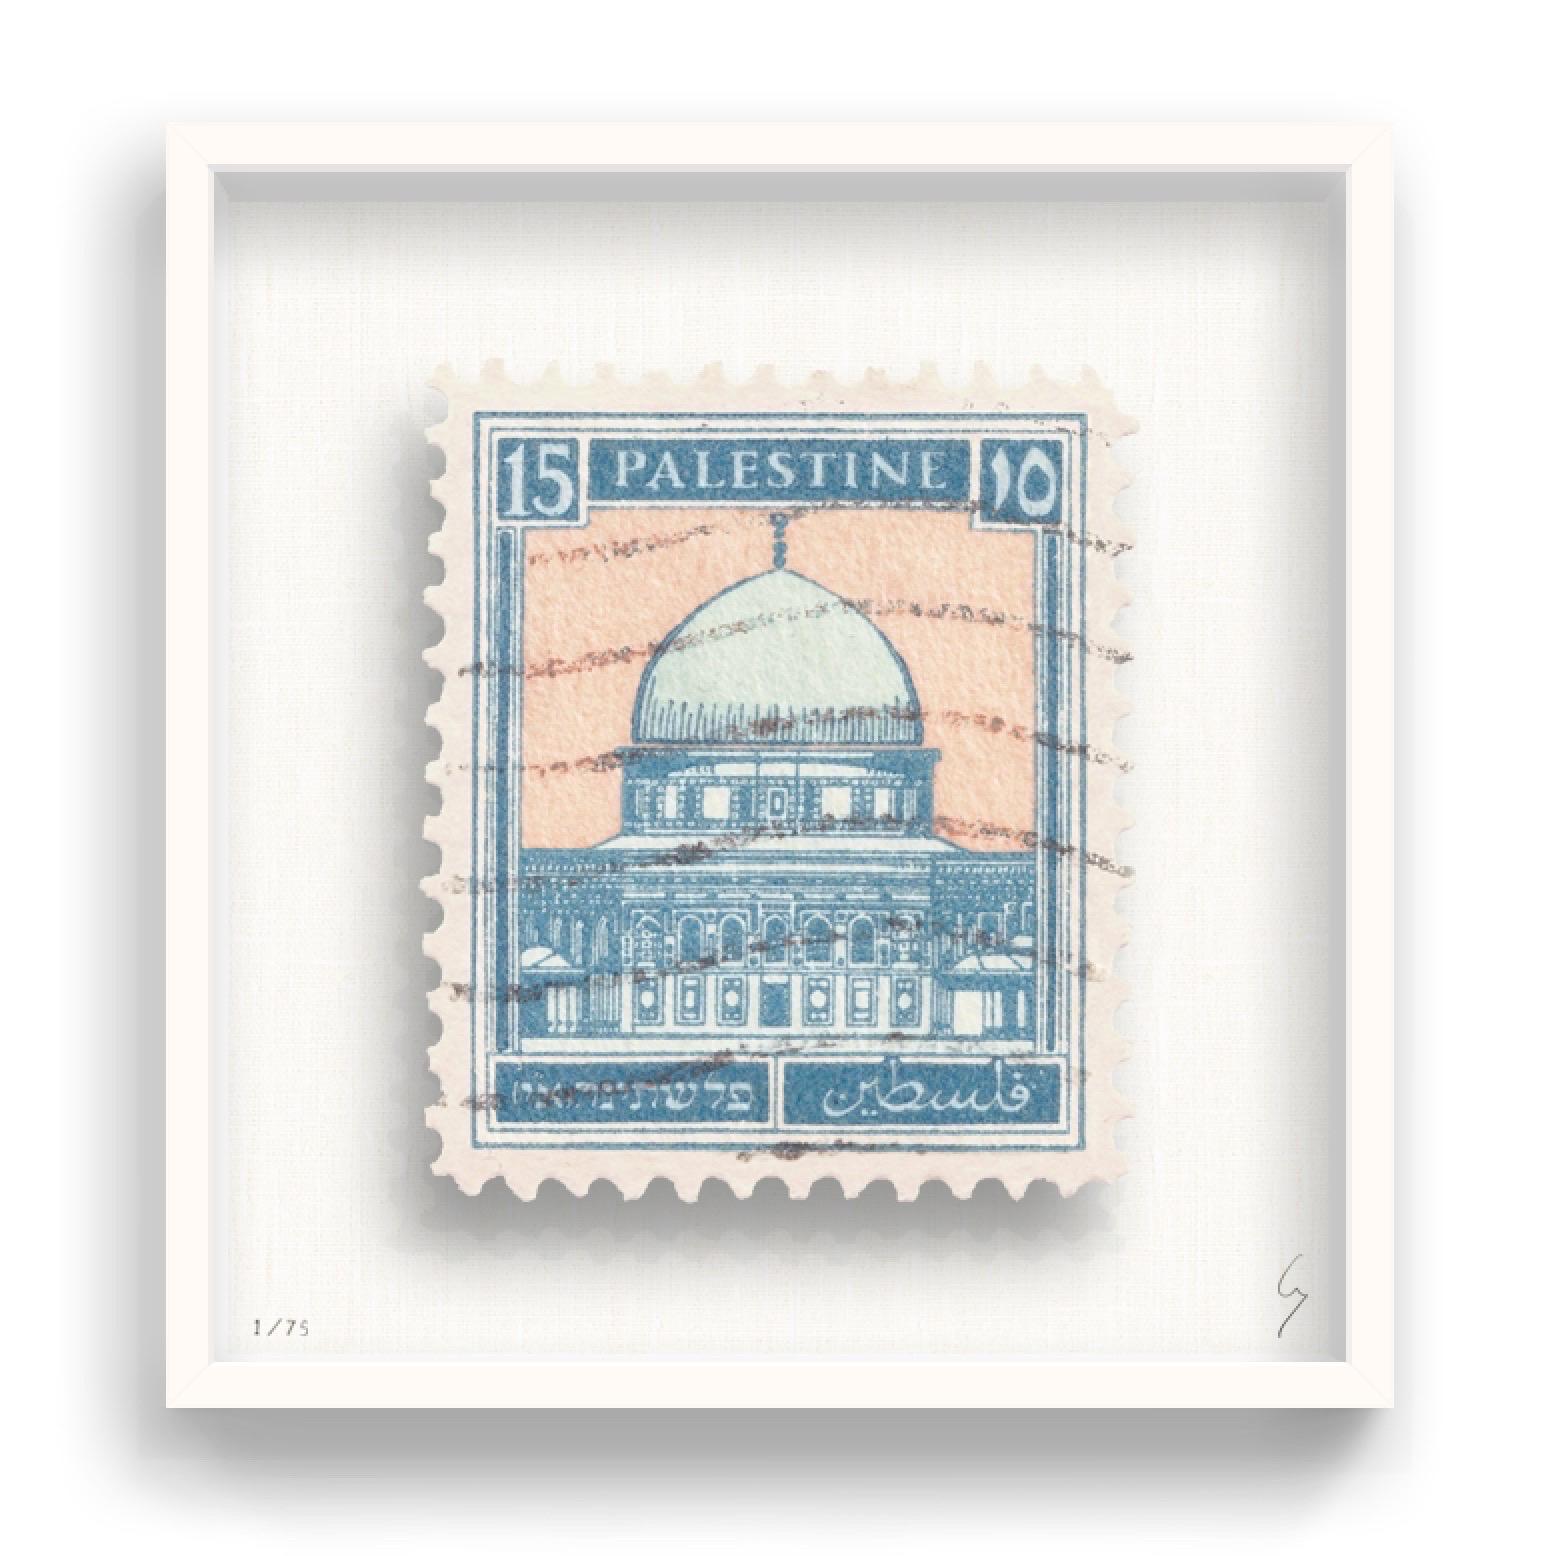 Guy Gee, Palestine (medium)

Hand-engraved print on 350gsm on G.F Smith card
31 x 35 cm (12 1/5 x 13 4/5)
Frame included 
Edition of 75 

Each artwork by Guy had been digitally reimagined from an original postage stamp. Cut out and finished by hand,